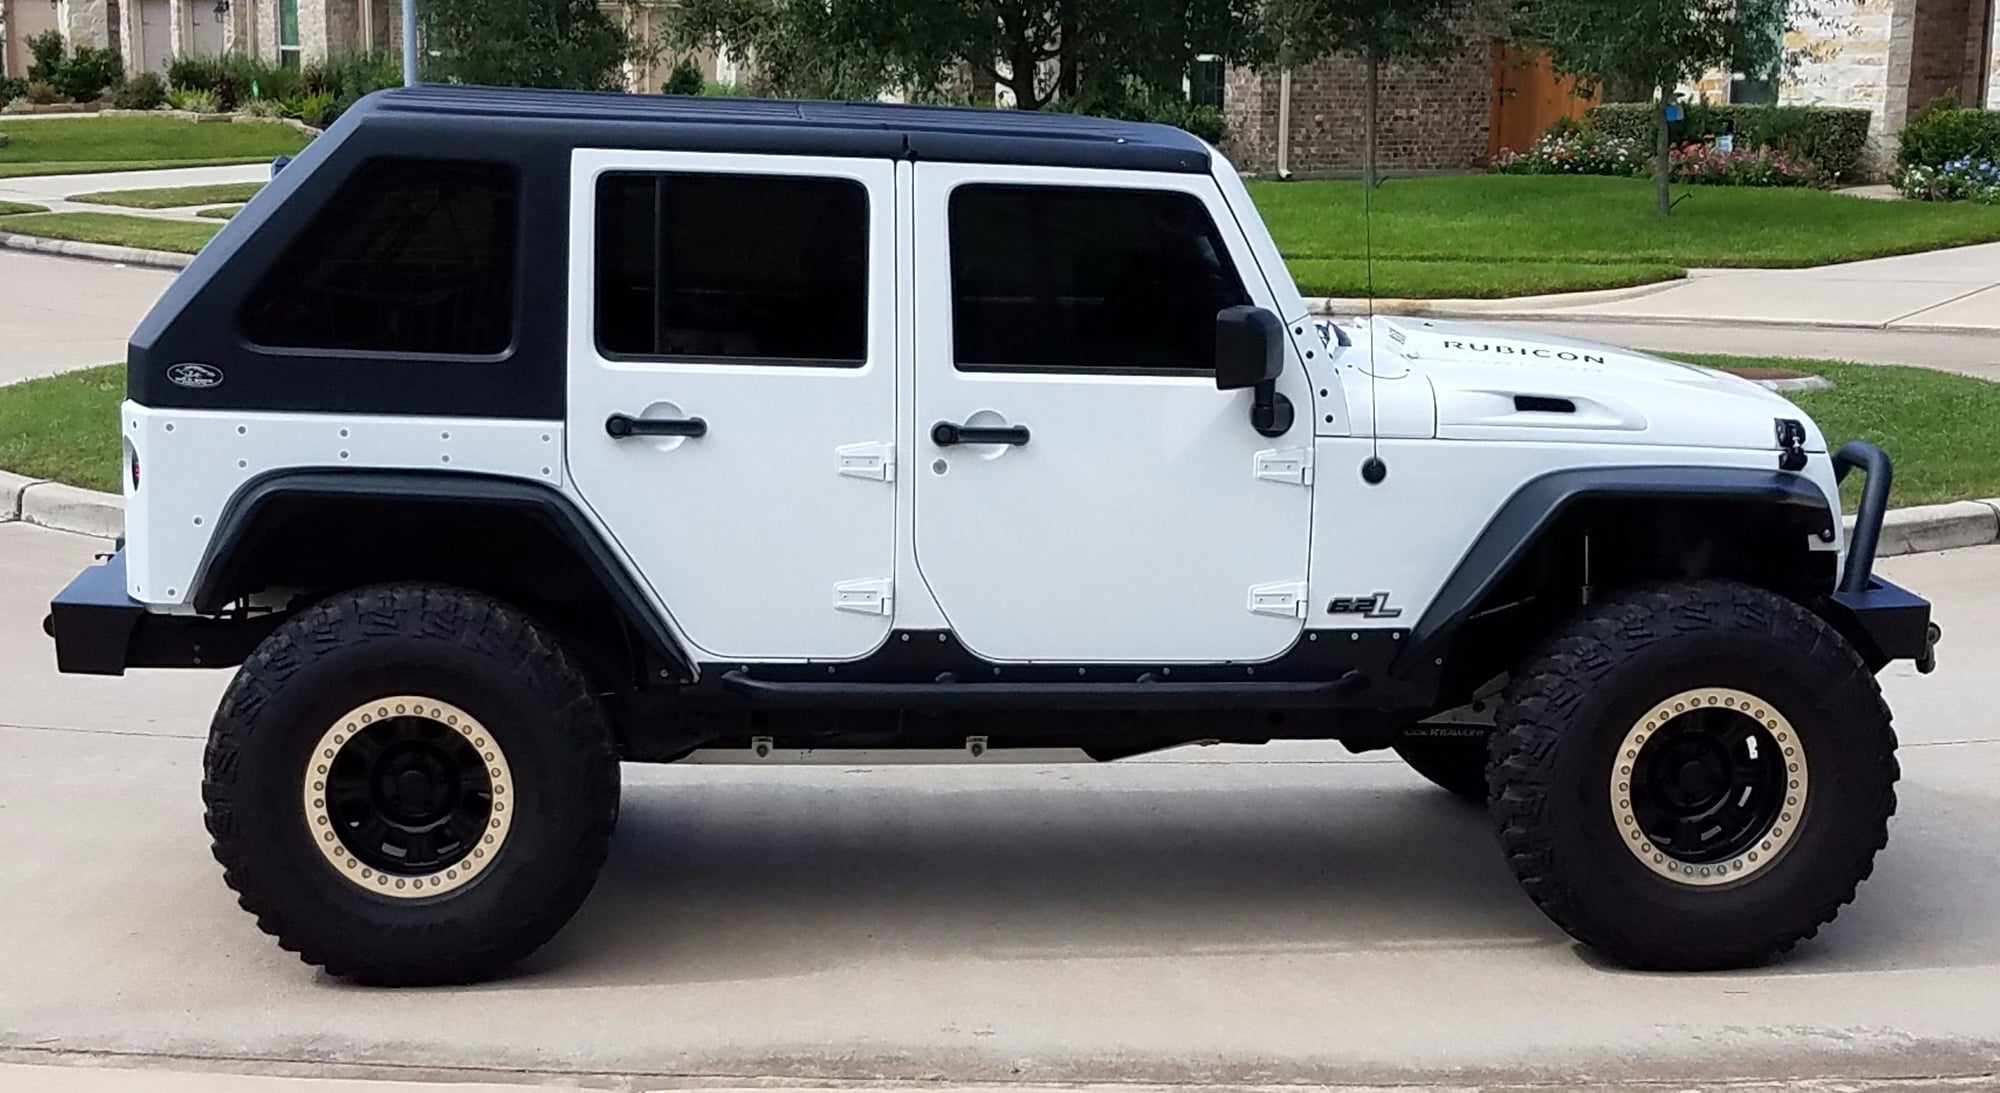 2012 Jeep Wrangler - Hauk Offroad 2012 Rubicon with Motech v8 swap - Used - VIN 1C4HJWFG4CL162420 - 31,000 Miles - 8 cyl - 4WD - Automatic - White - Richmond, TX 77407, United States